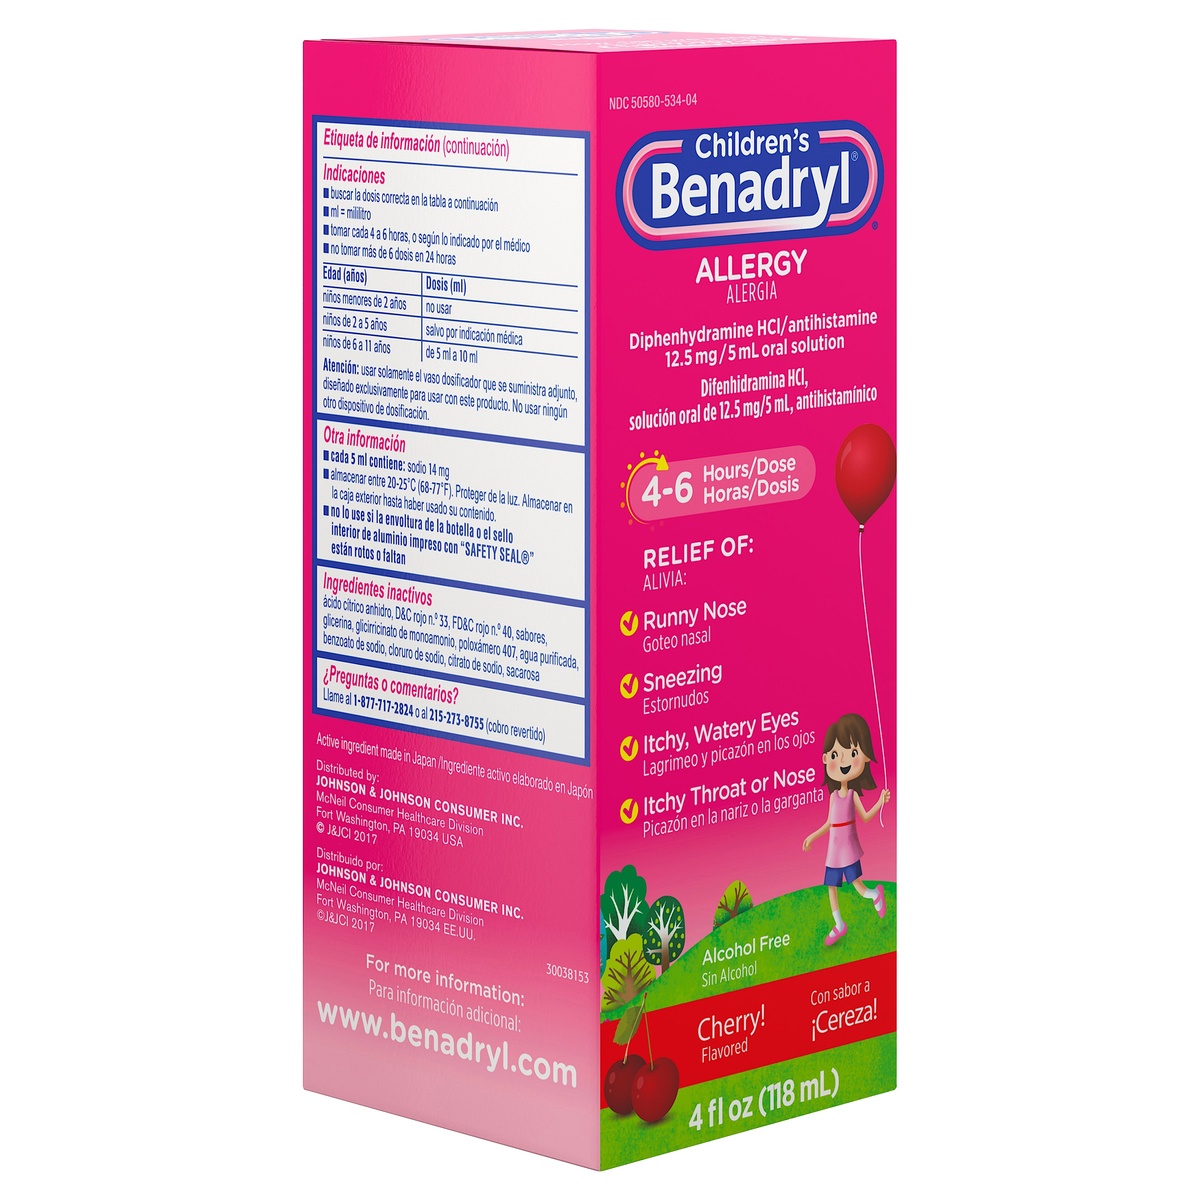 slide 2 of 5, Benadryl Allergy Relief Liquid Medicine with Diphenhydramine HCl, Kids' Allergy Syrup for Allergy Symptoms Like Runny Nose, Itchy Eyes & More, Cherry Flavor, 4 fl oz